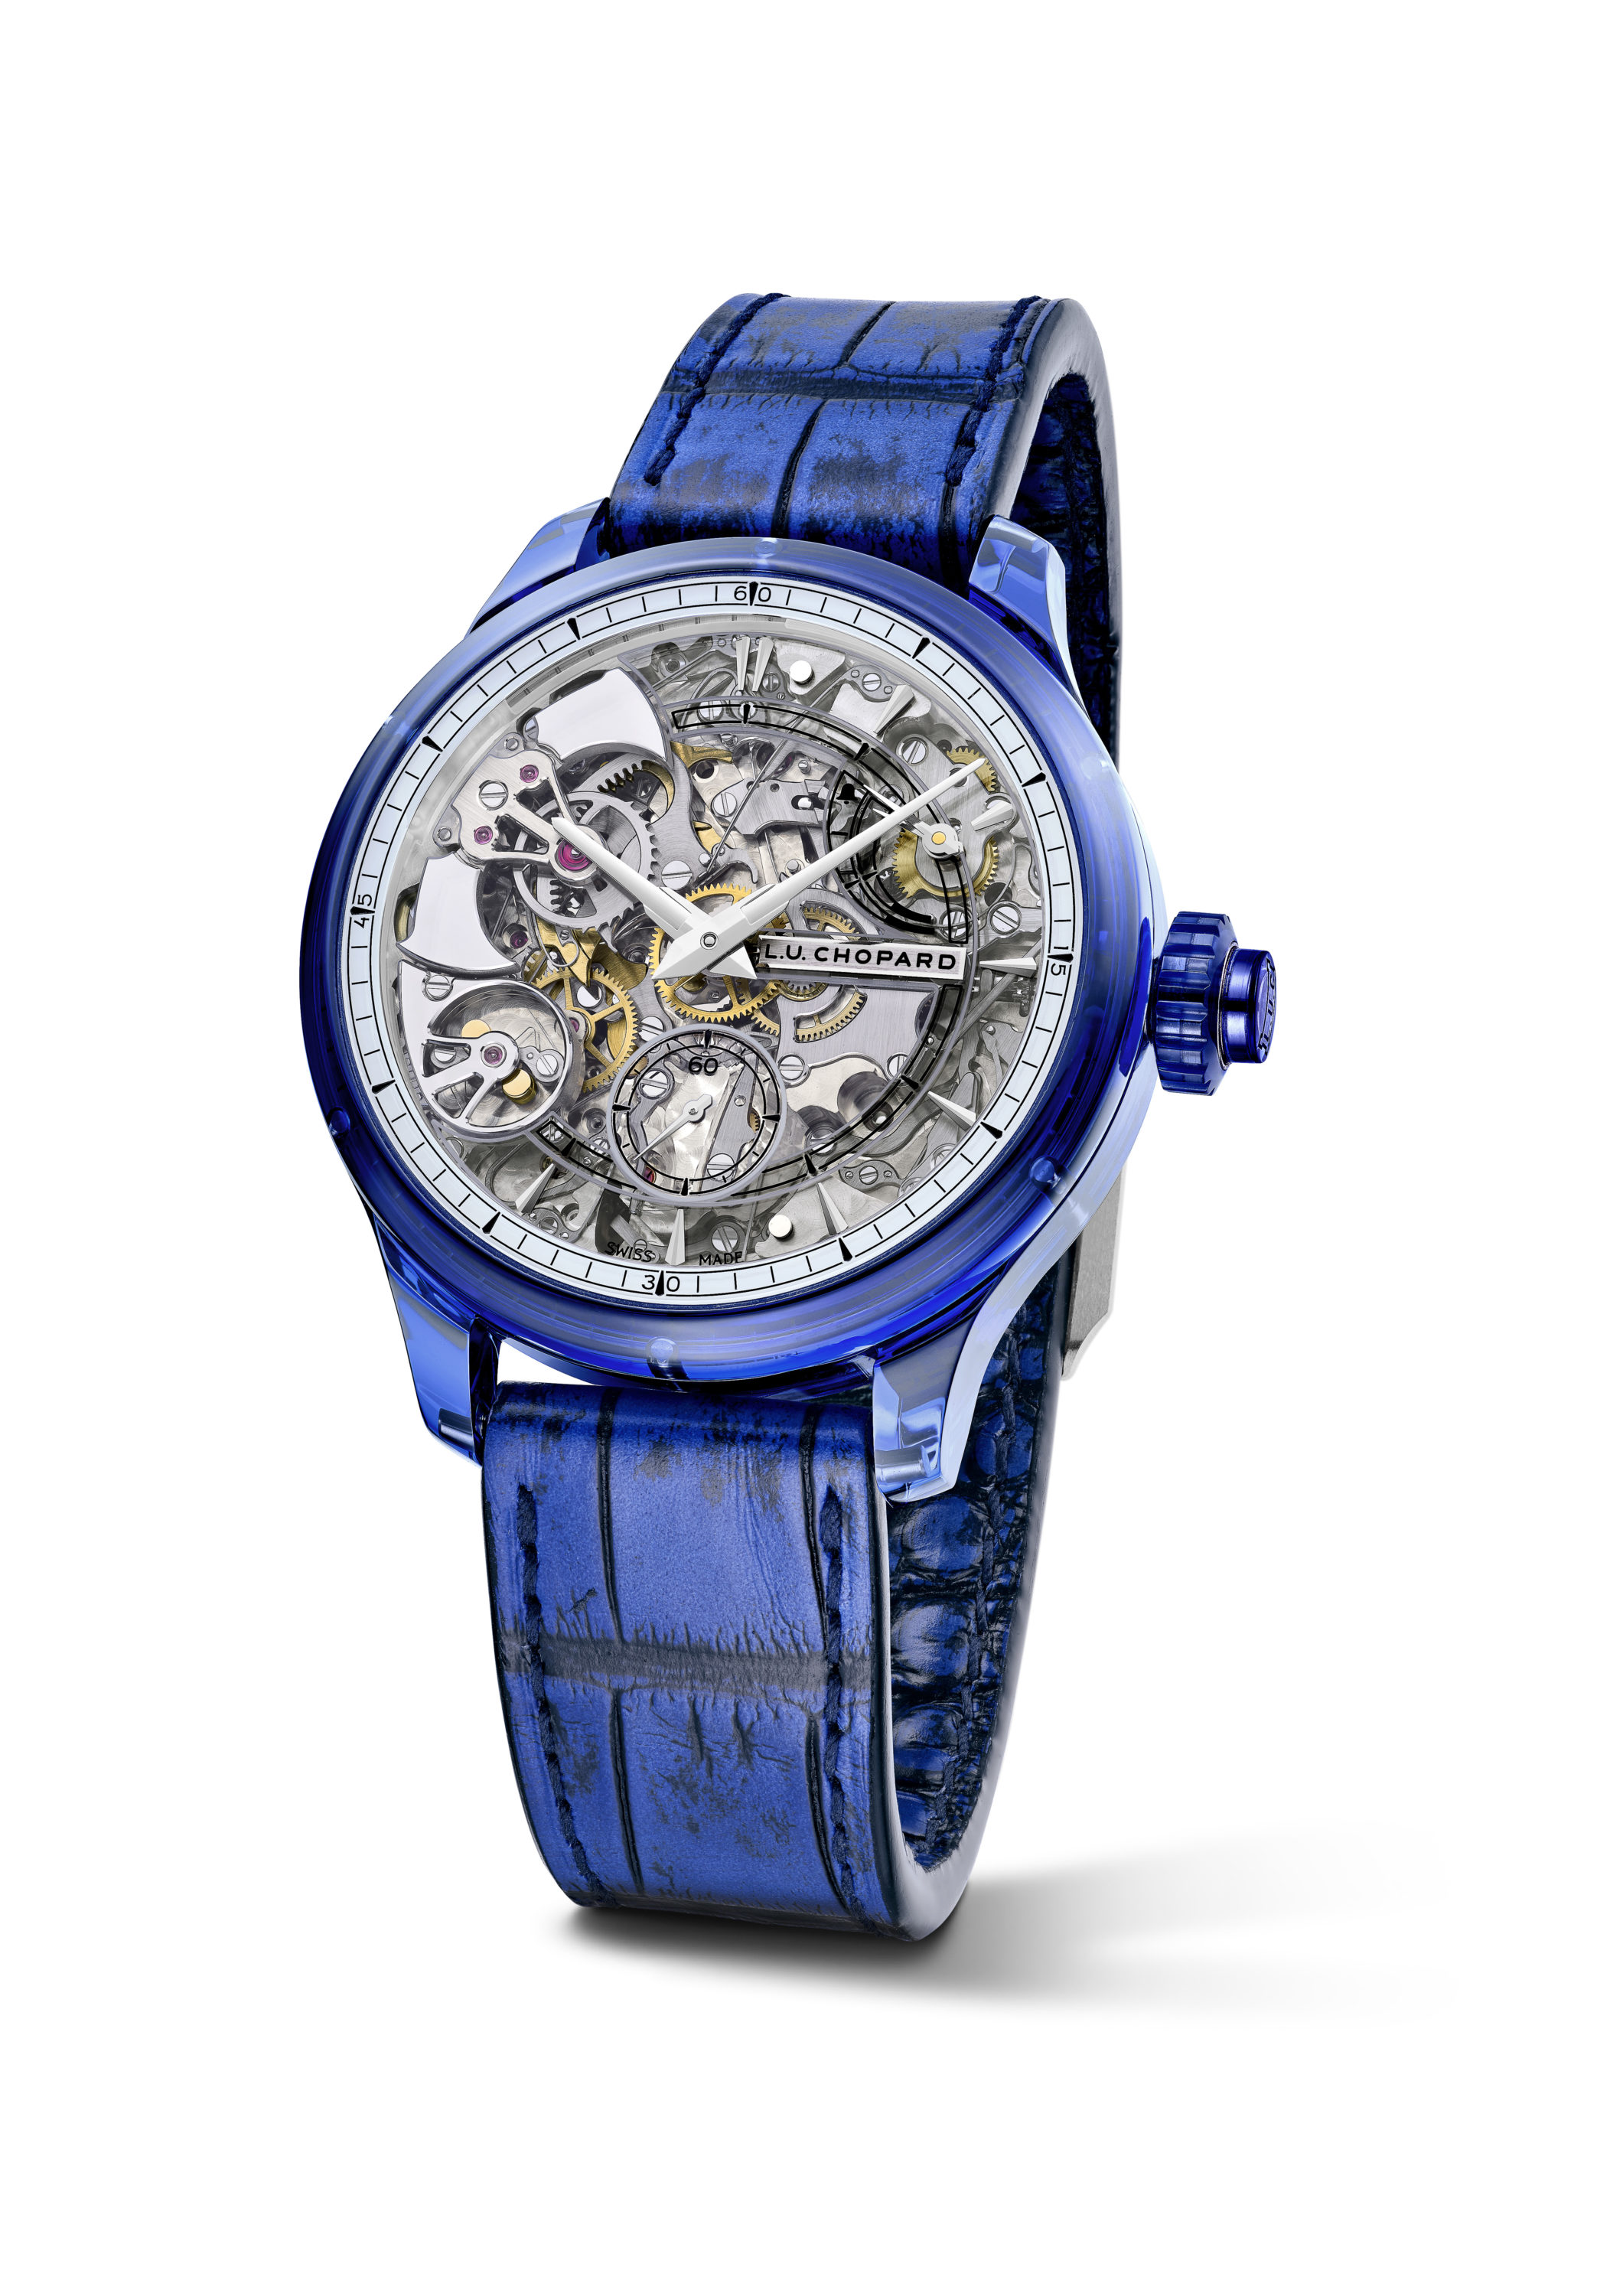 Showing at WatchTime New York 2023: Chopard L.U.C Full Strike Sapphire